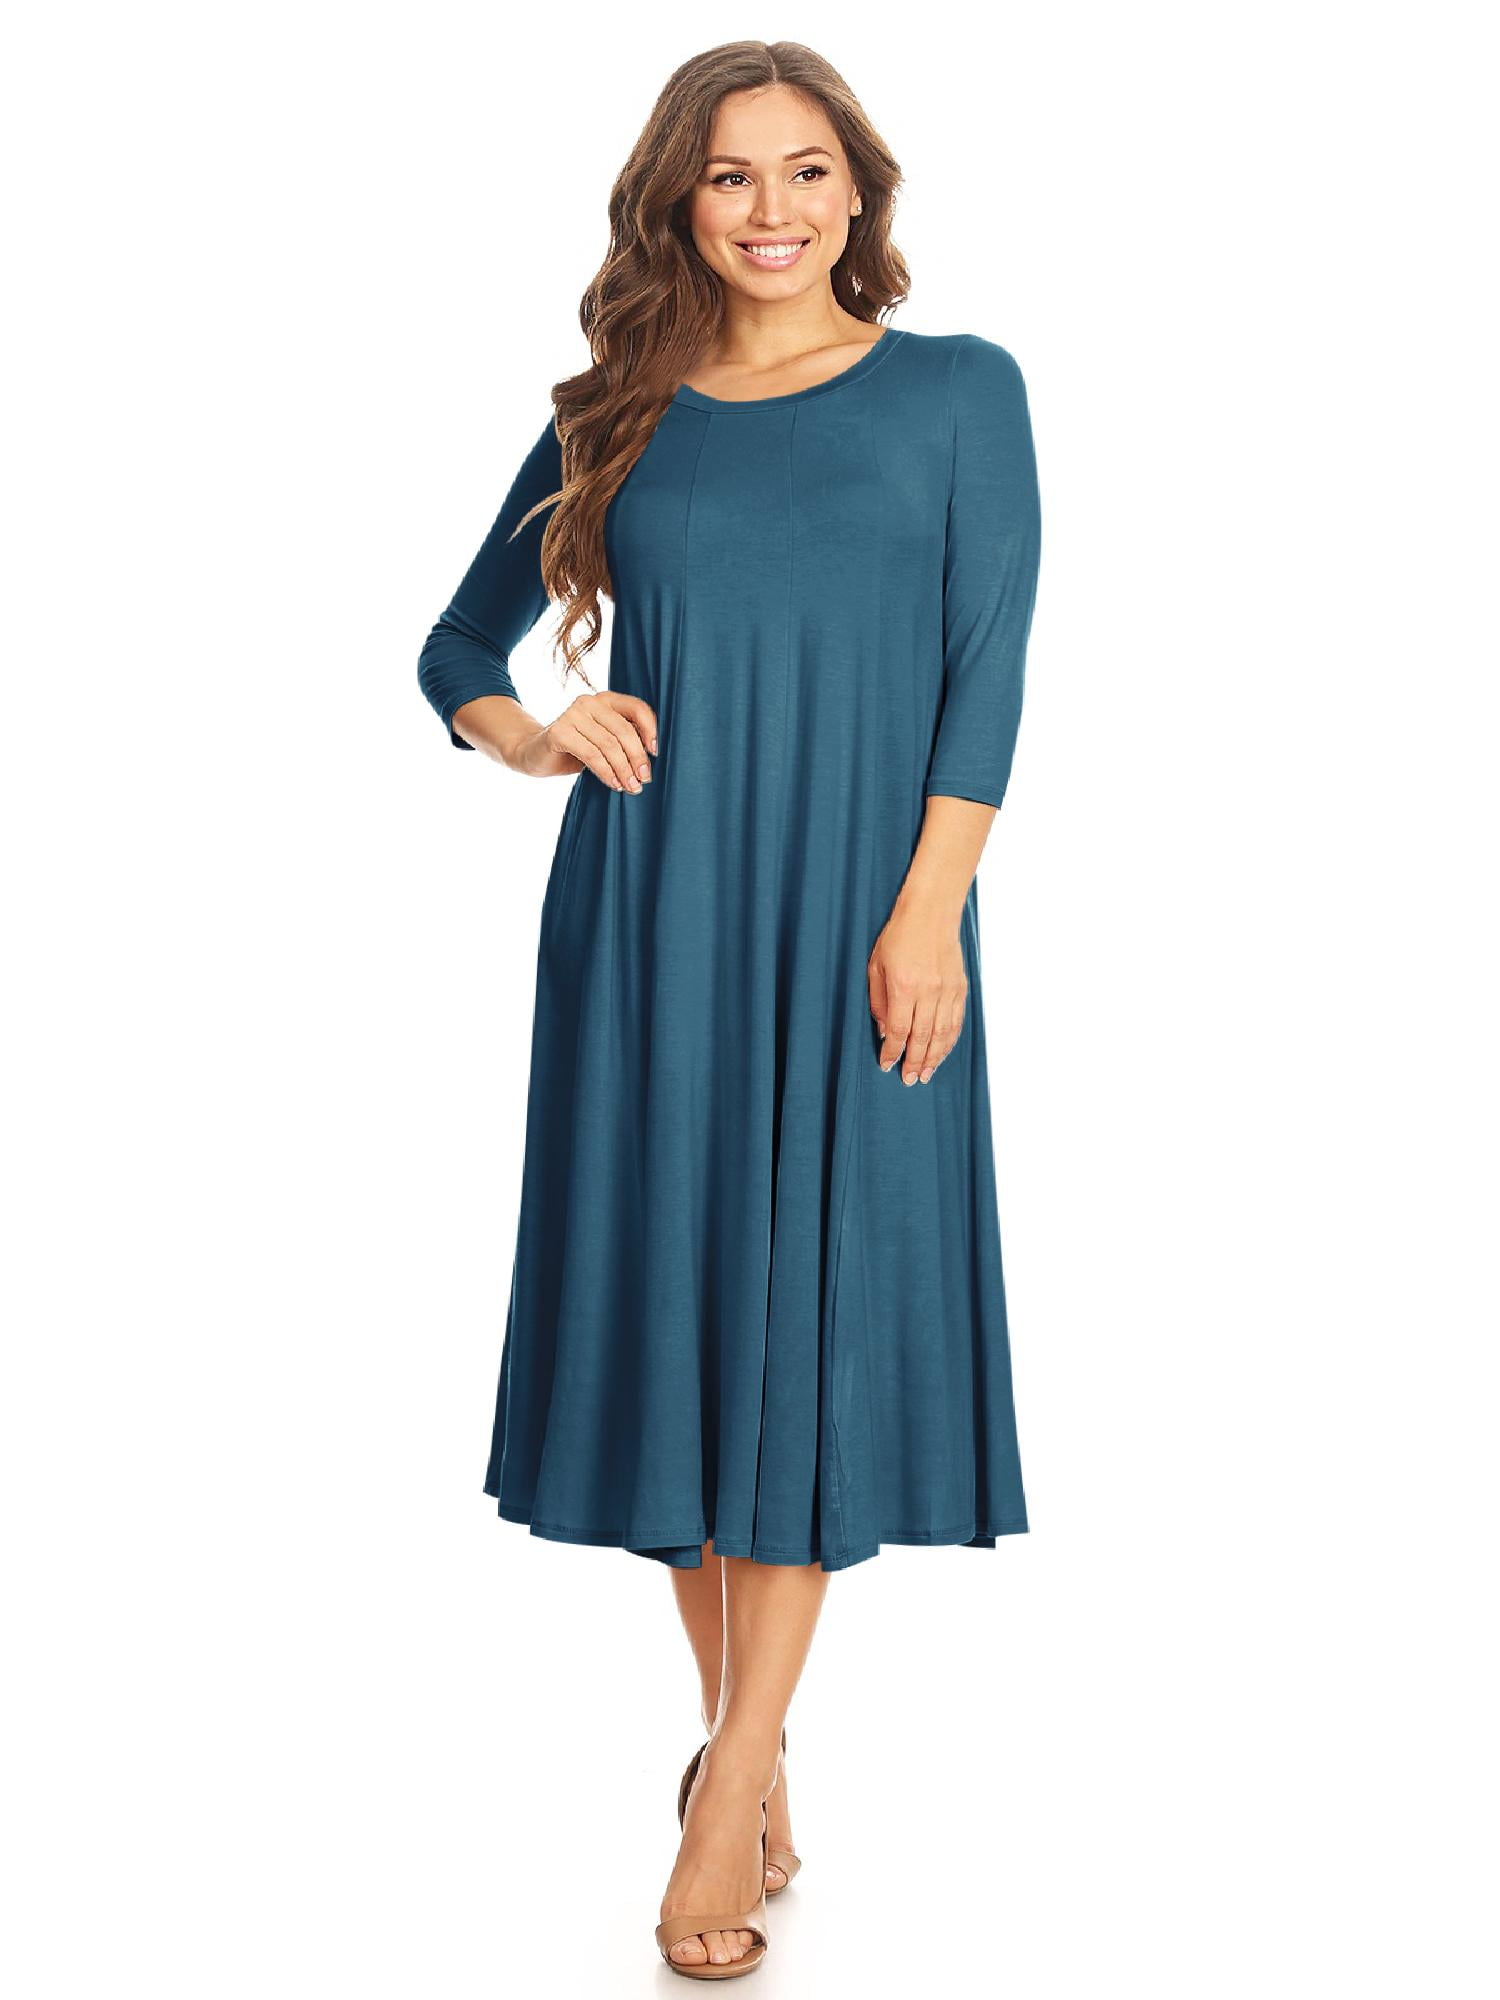 S-3XL Womens Casual Basic Comfy 3/4 Sleeve Flare A-line Midi Long Maxi Dress Made in USA 